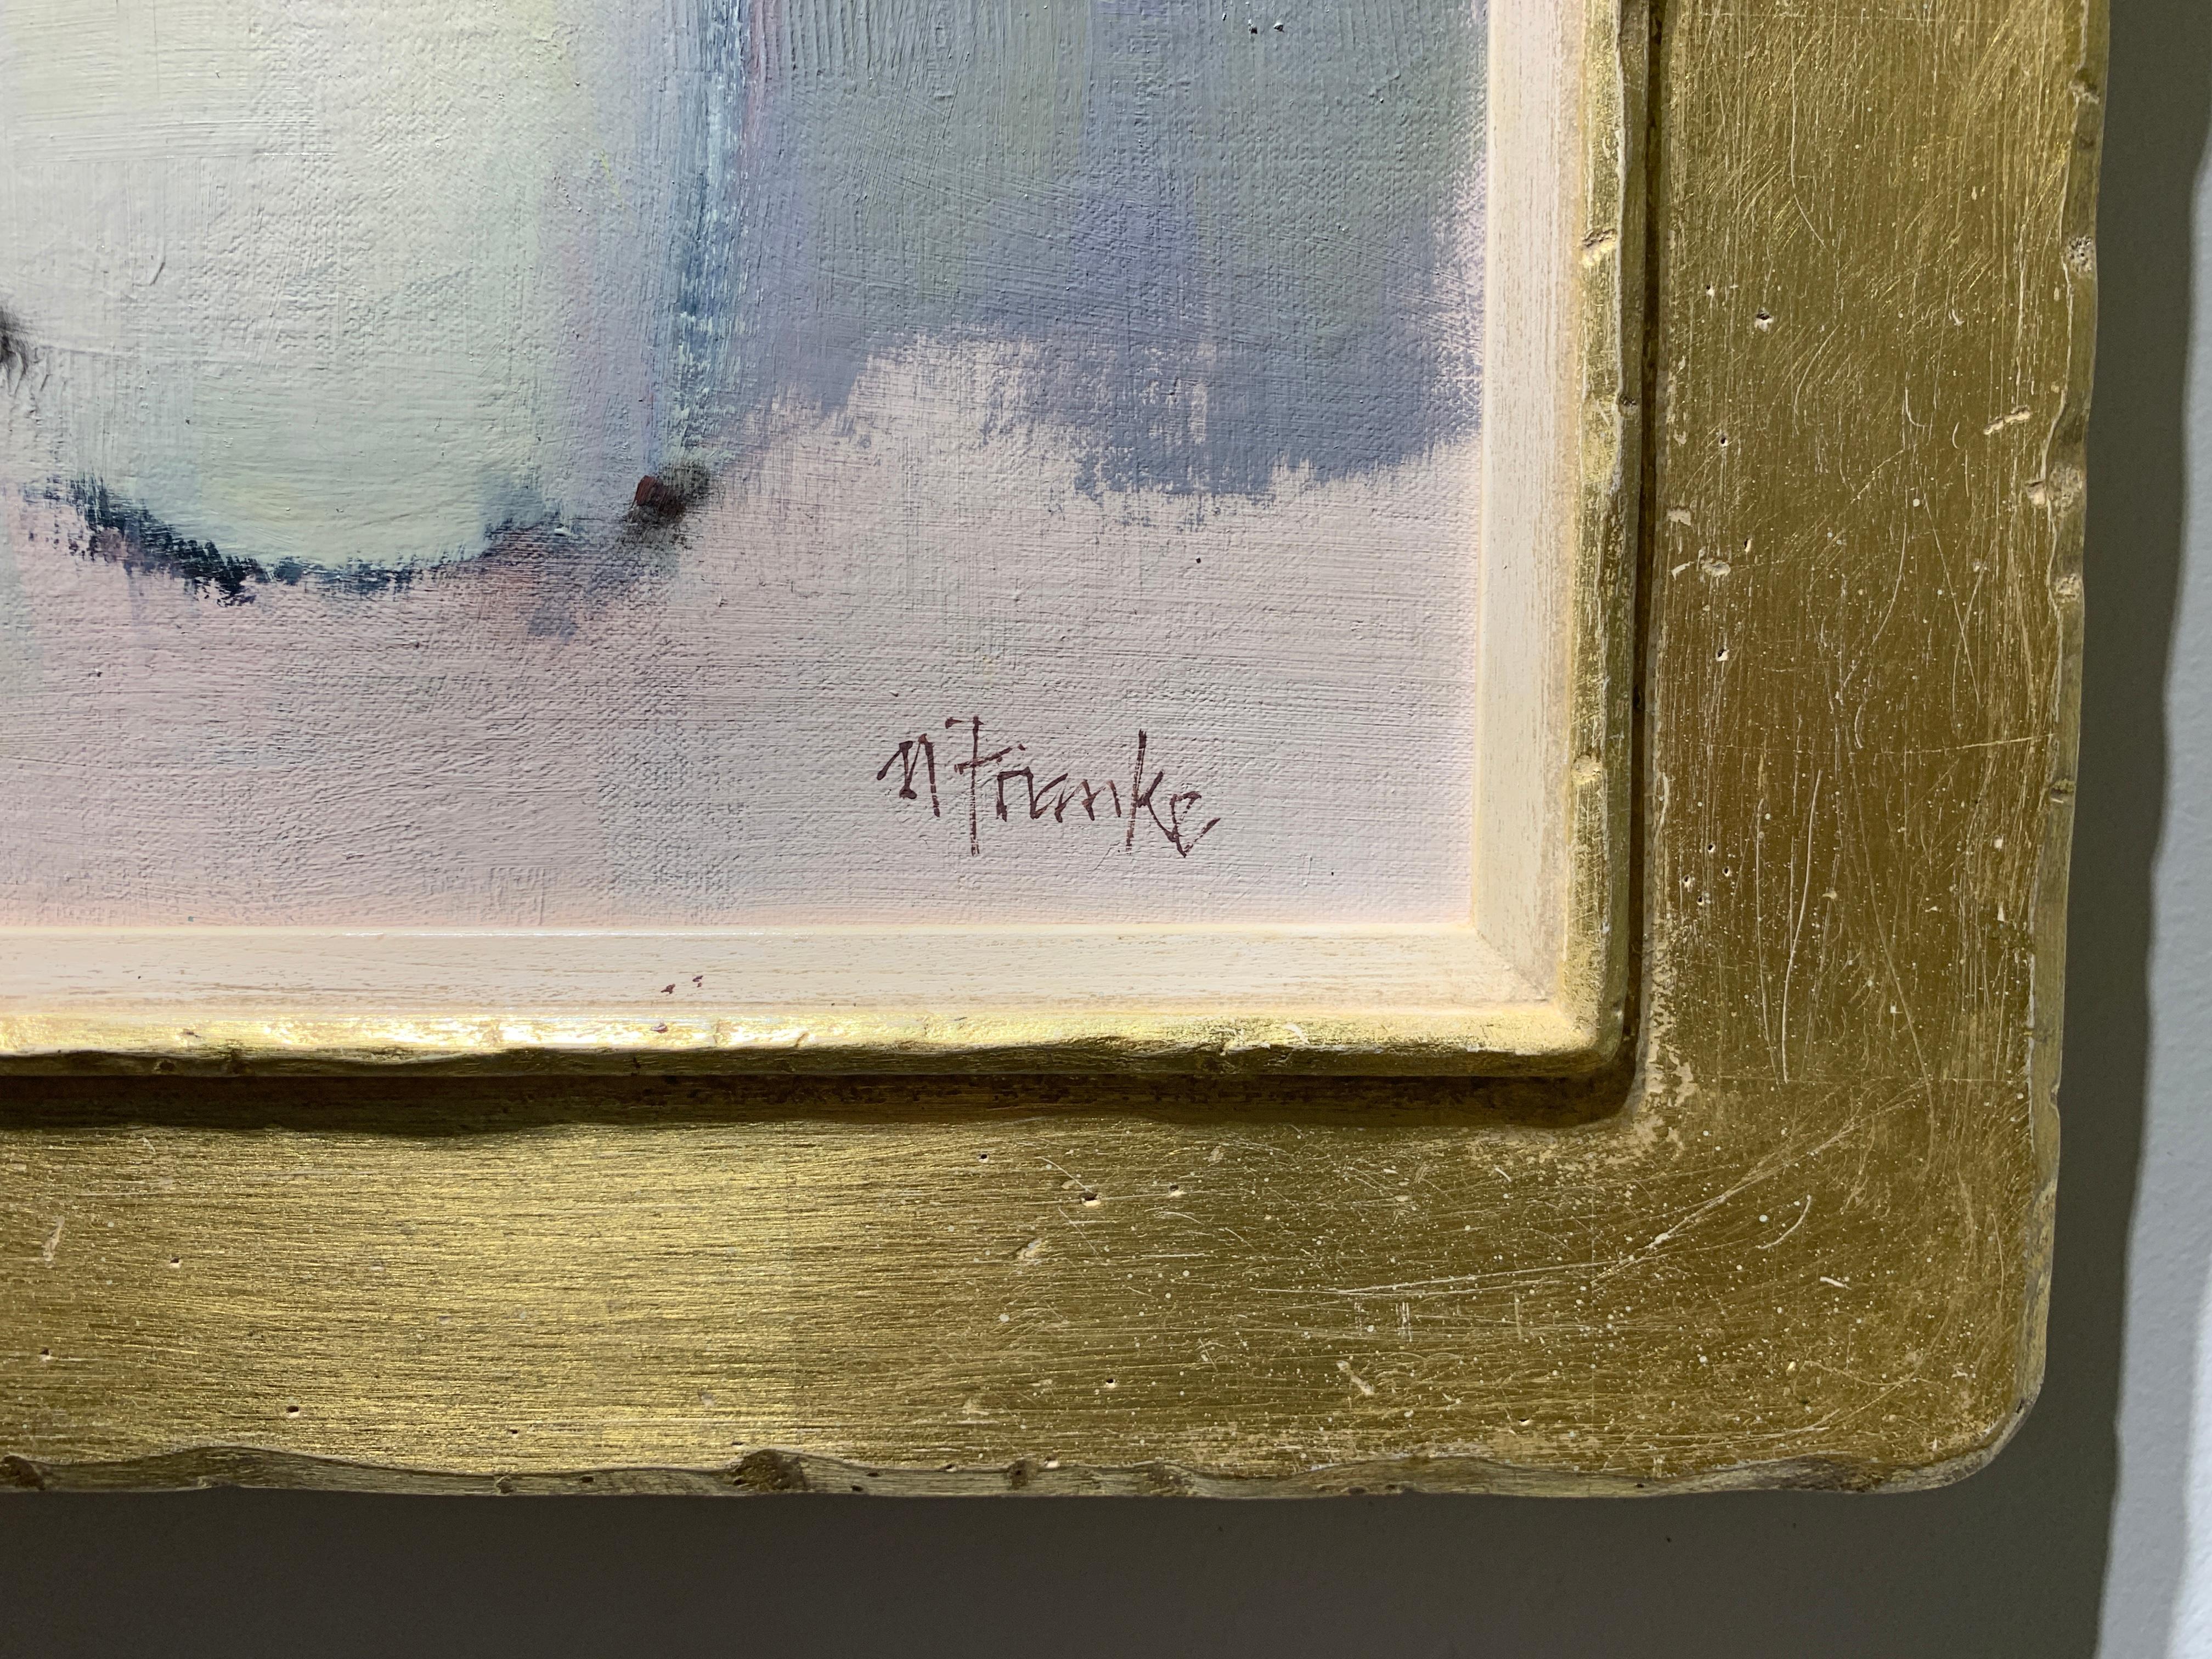 'Pale Grace' is a medium Impressionist oil on canvas floral painting of square format created by American artist Nancy Franke in 2019. Featuring a cool palette made of white, green, purple, blush and blue tones, with a pop of red; this painting